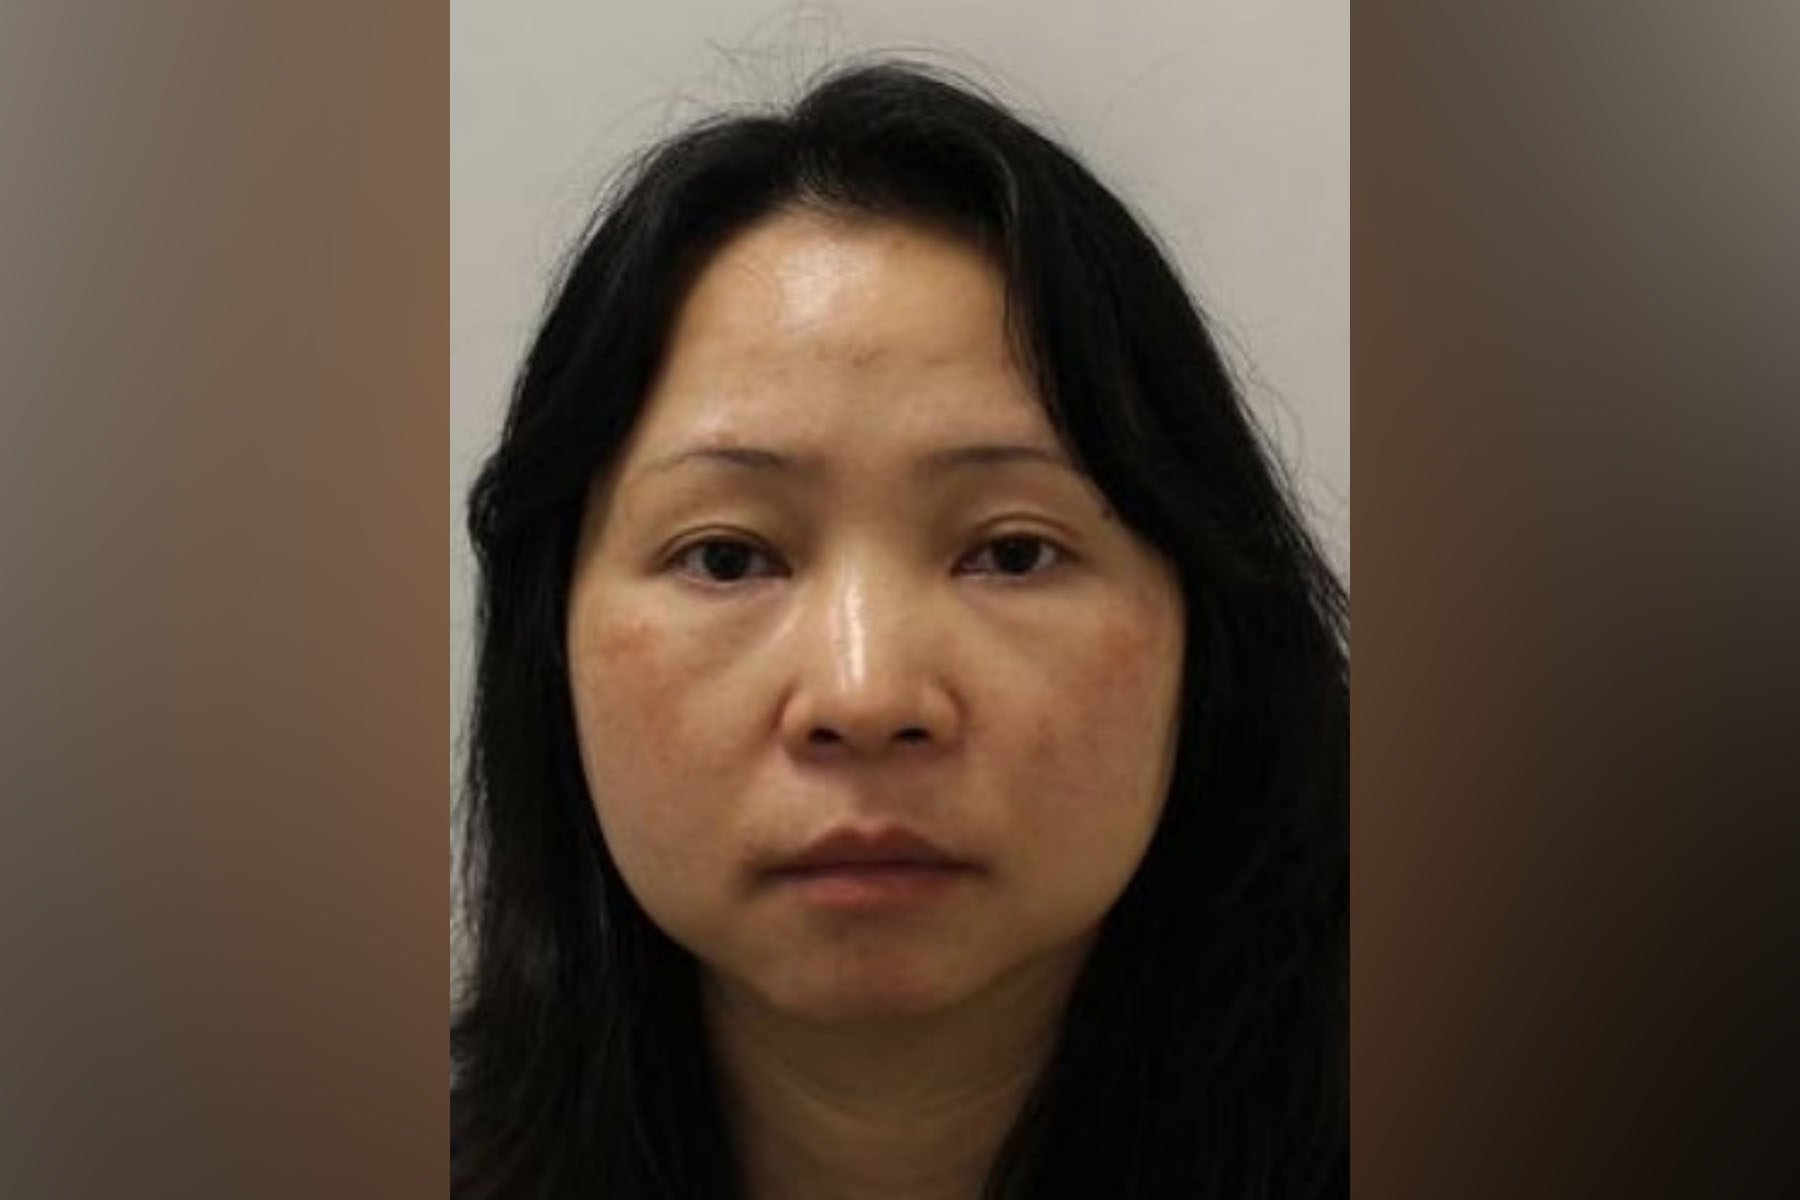 Wen Jian was convicted of one count of money laundering after a trial in a London court. Photo: UK Crown Prosecution Service
